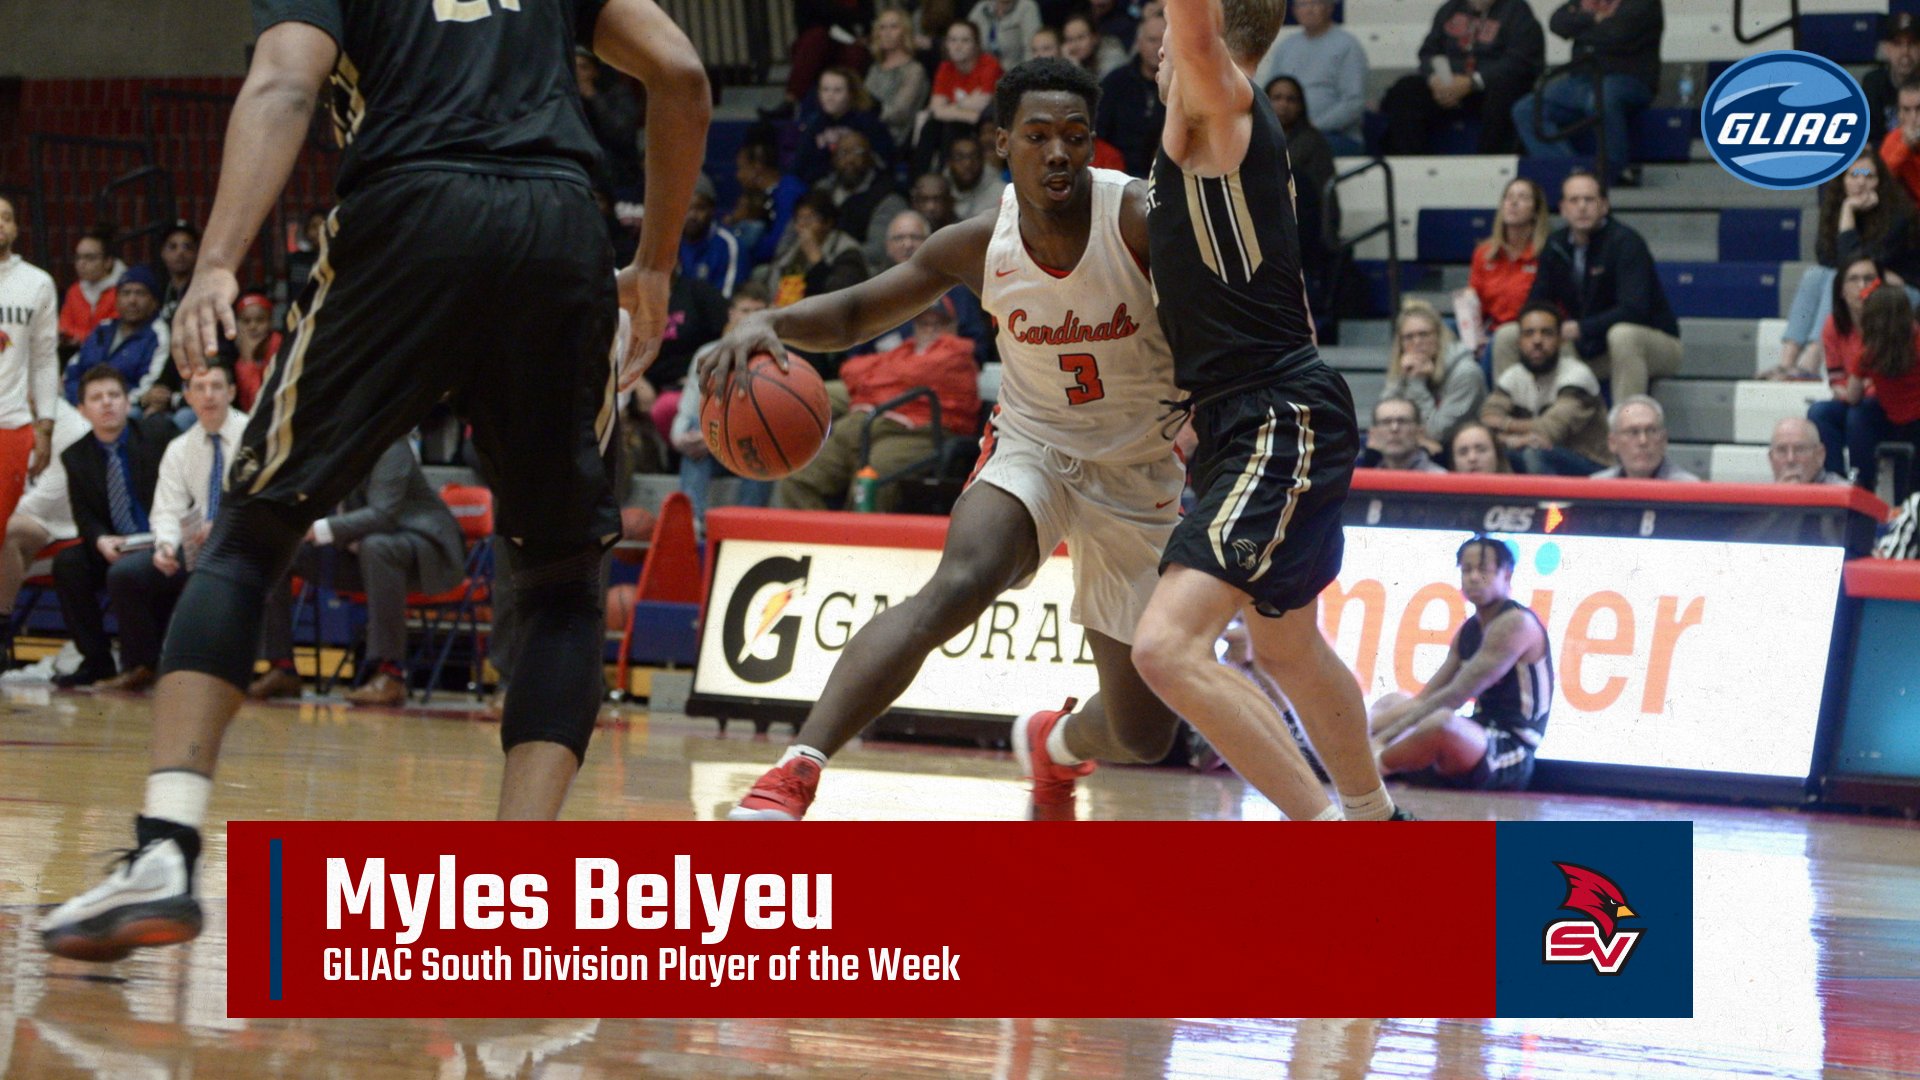 Myles Belyeu earns another GLIAC South Player of the Week honor